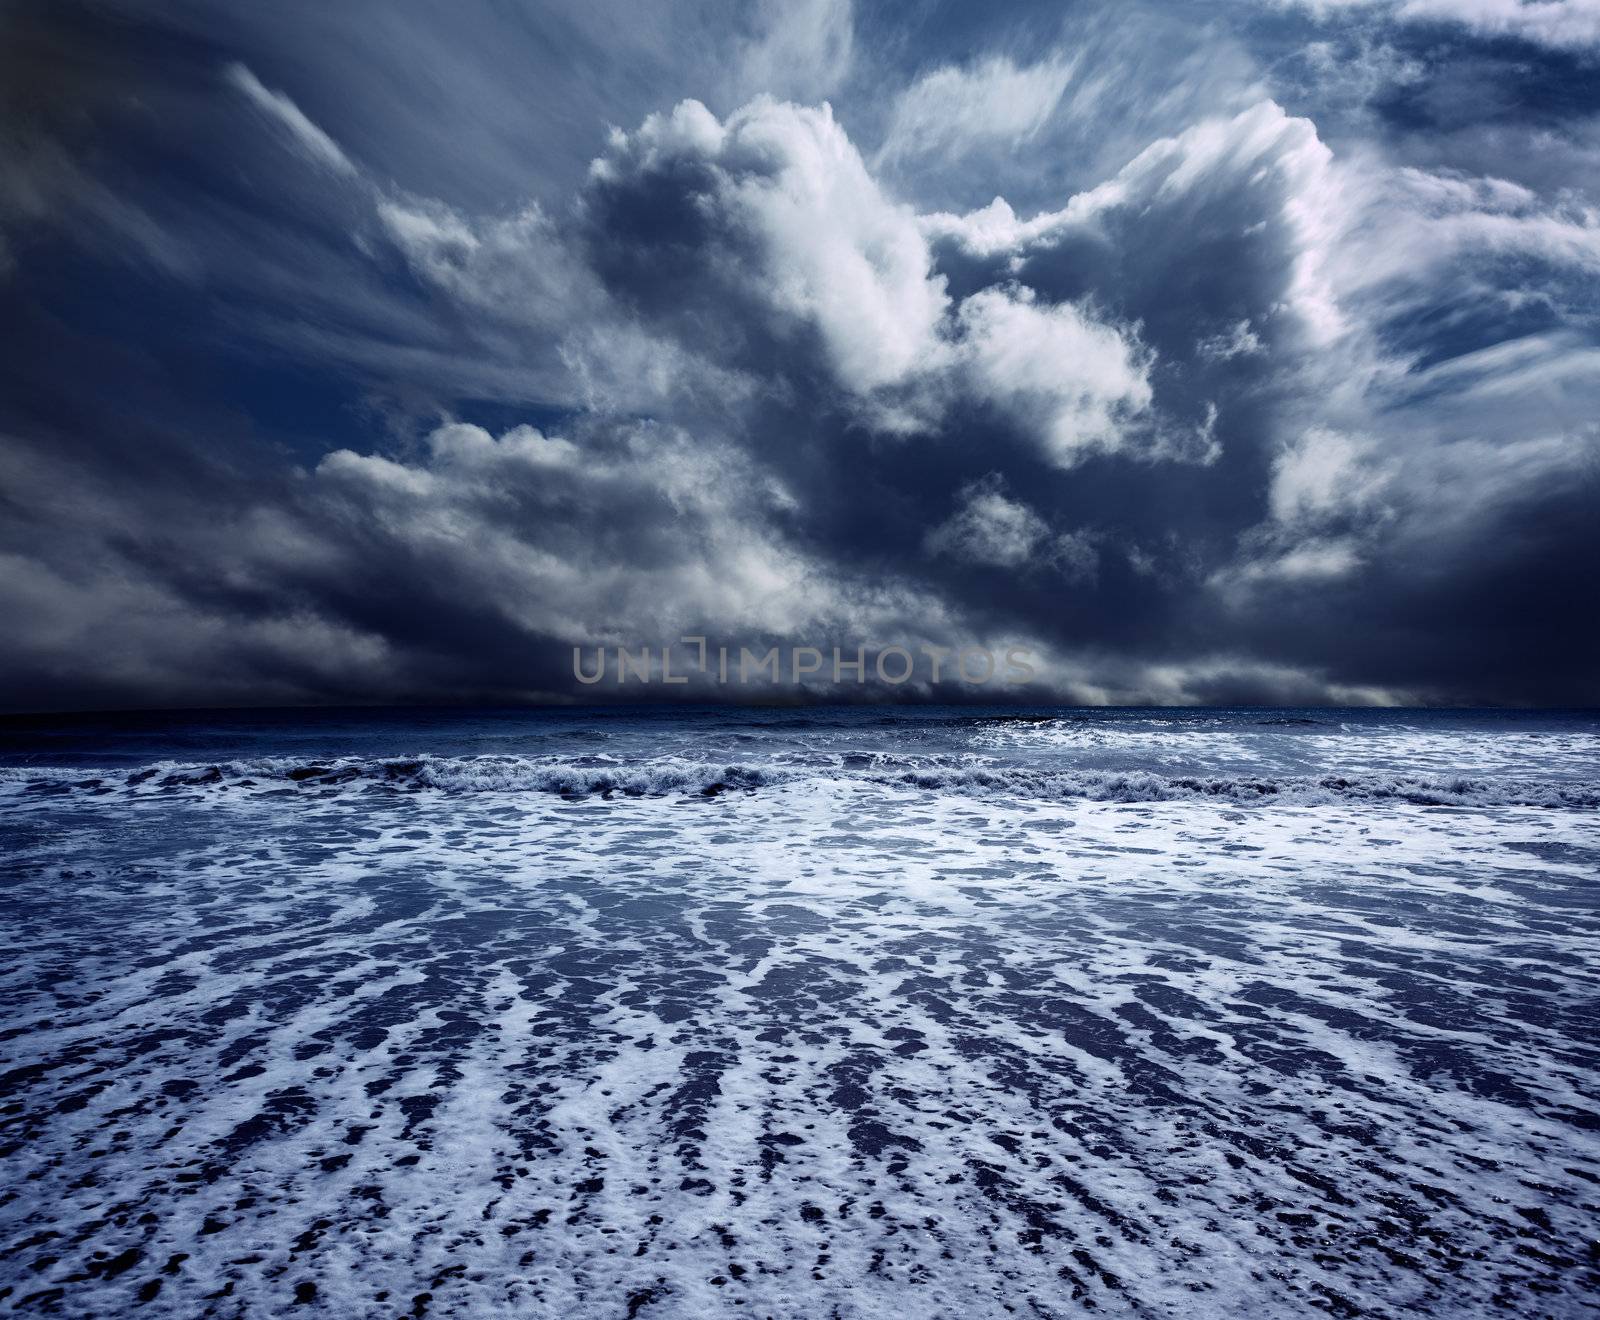 Background ocean storm with waves and clouds